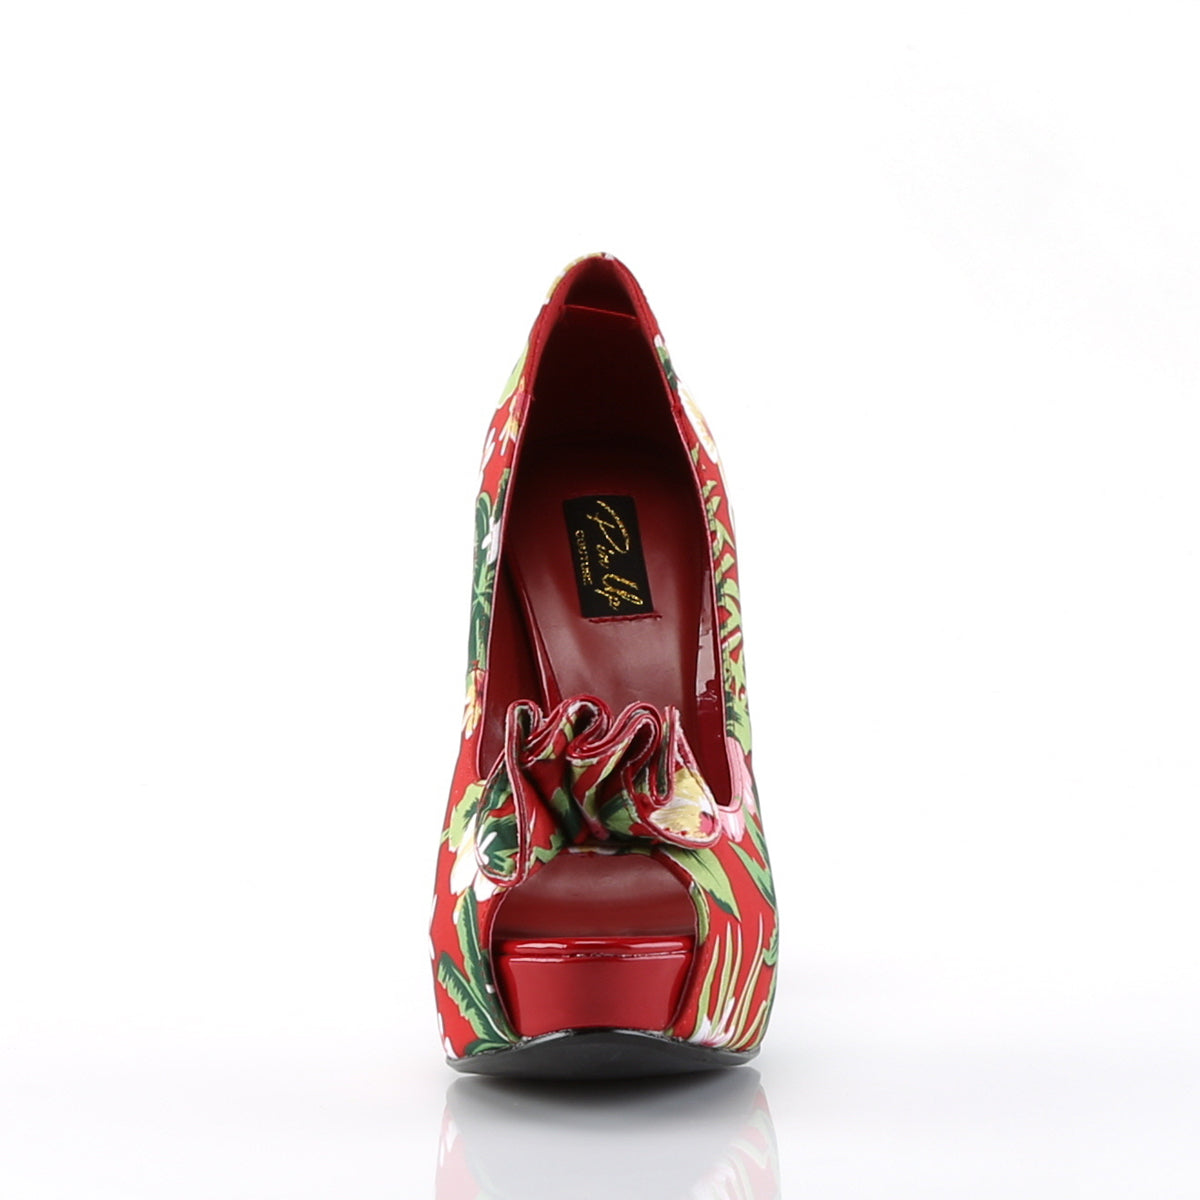 LOLITA-11 Pin Up 5" Heel Red Floral Retro Pin Up Shoes-Pin Up Couture- Sexy Shoes Alternative Footwear